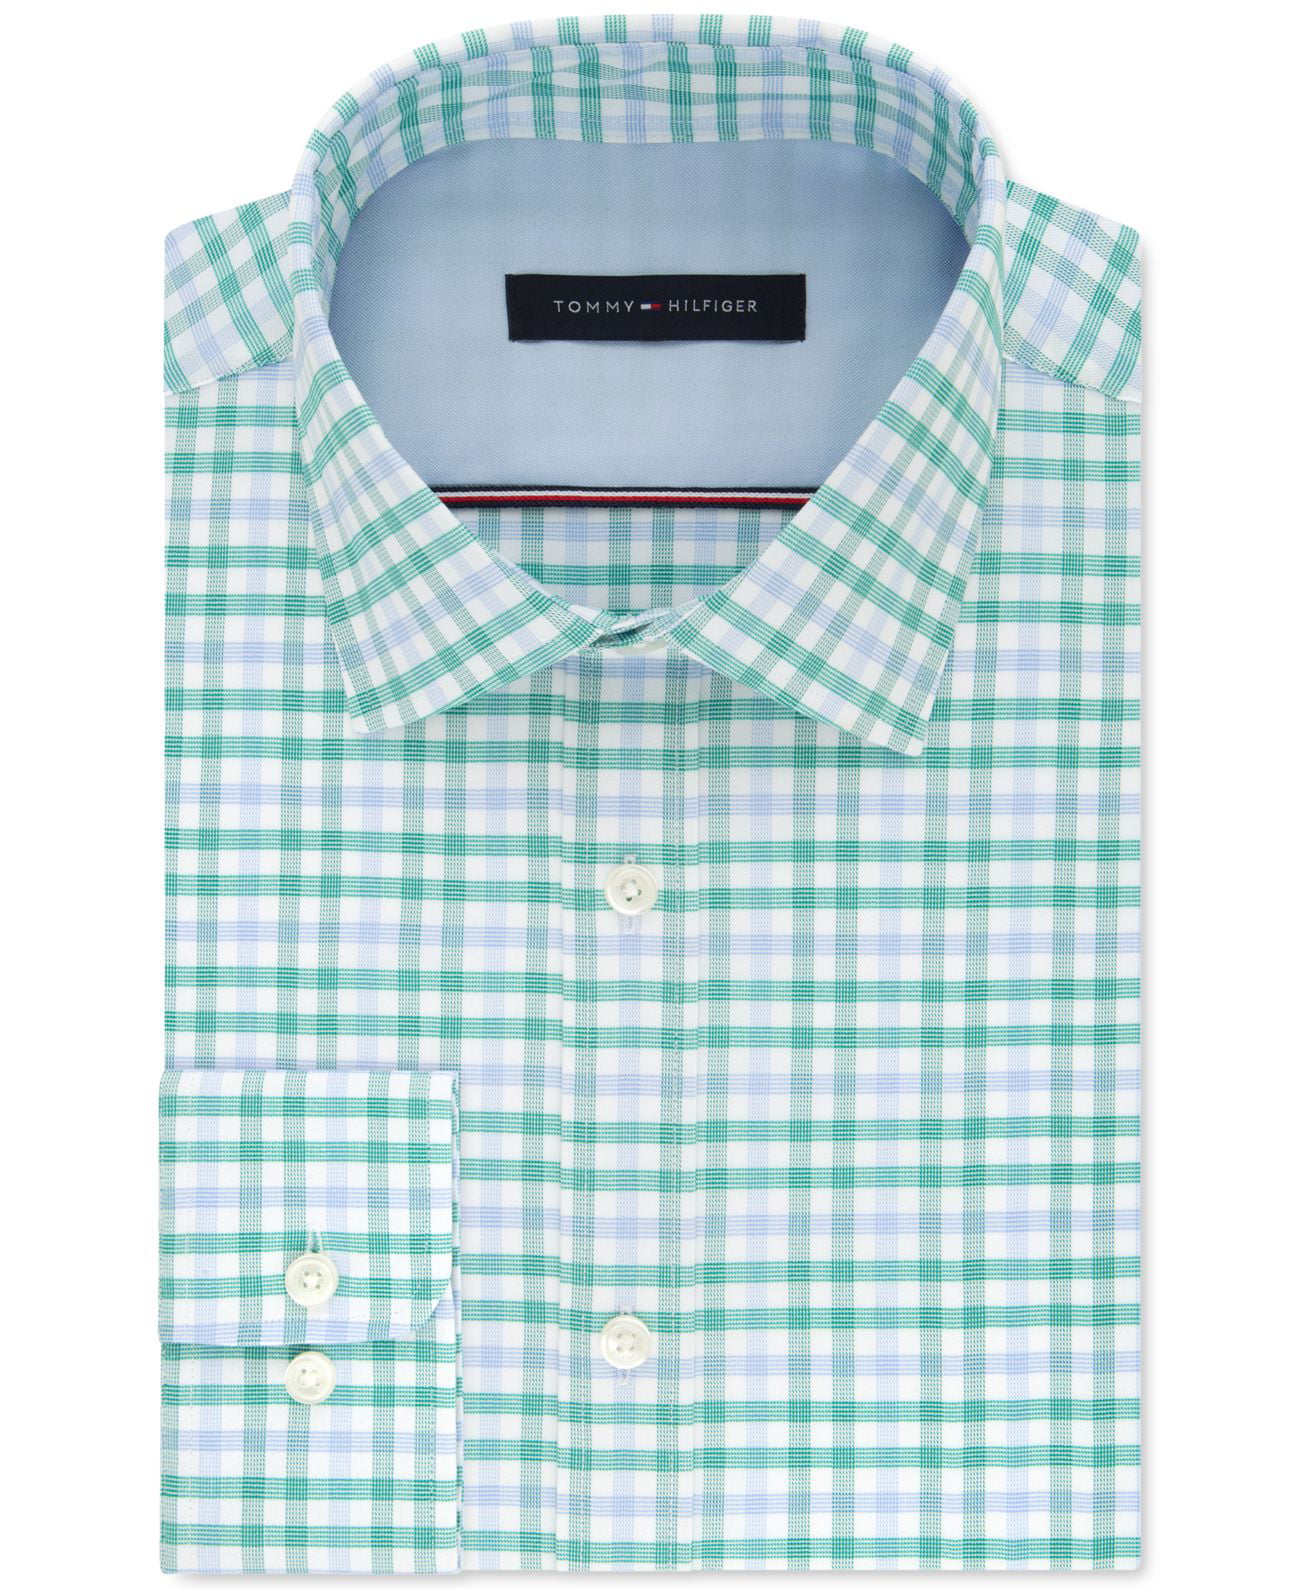 Tommy Hilfiger Men’s Athletic-Fit Check Dress Shirts, Green, 17.5x36/37